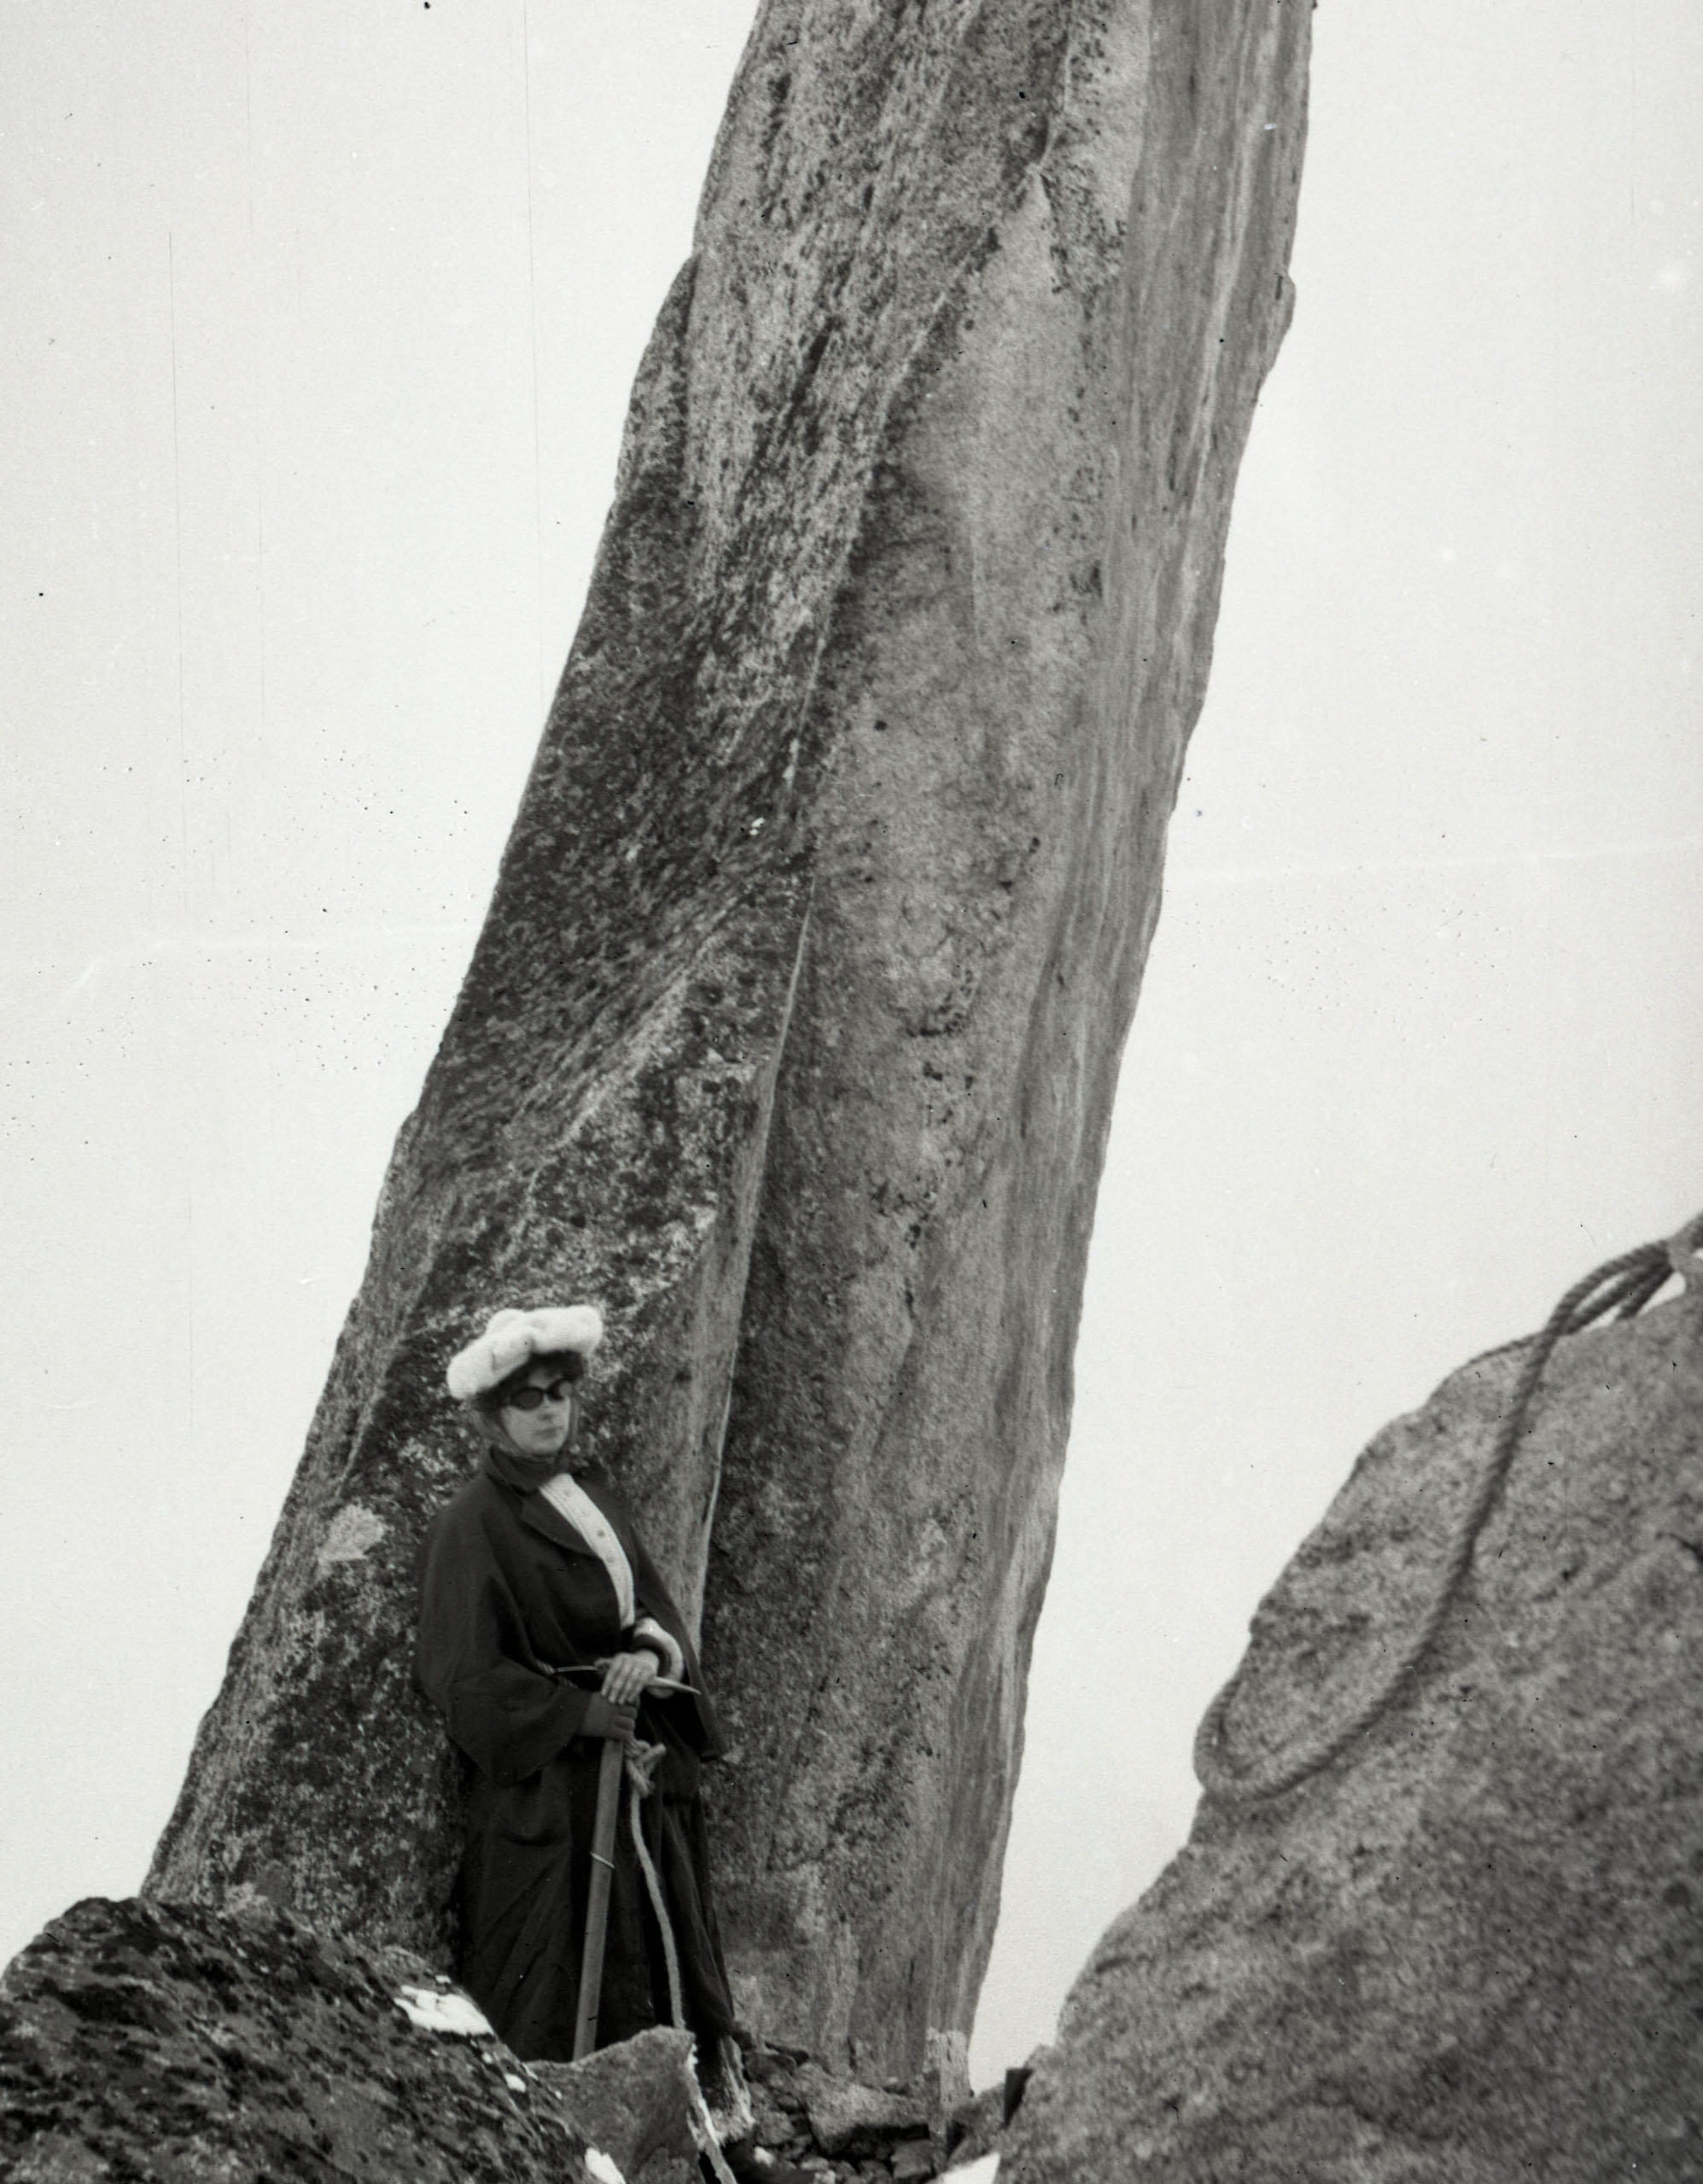 A woman summiting in the Alps circa 1911